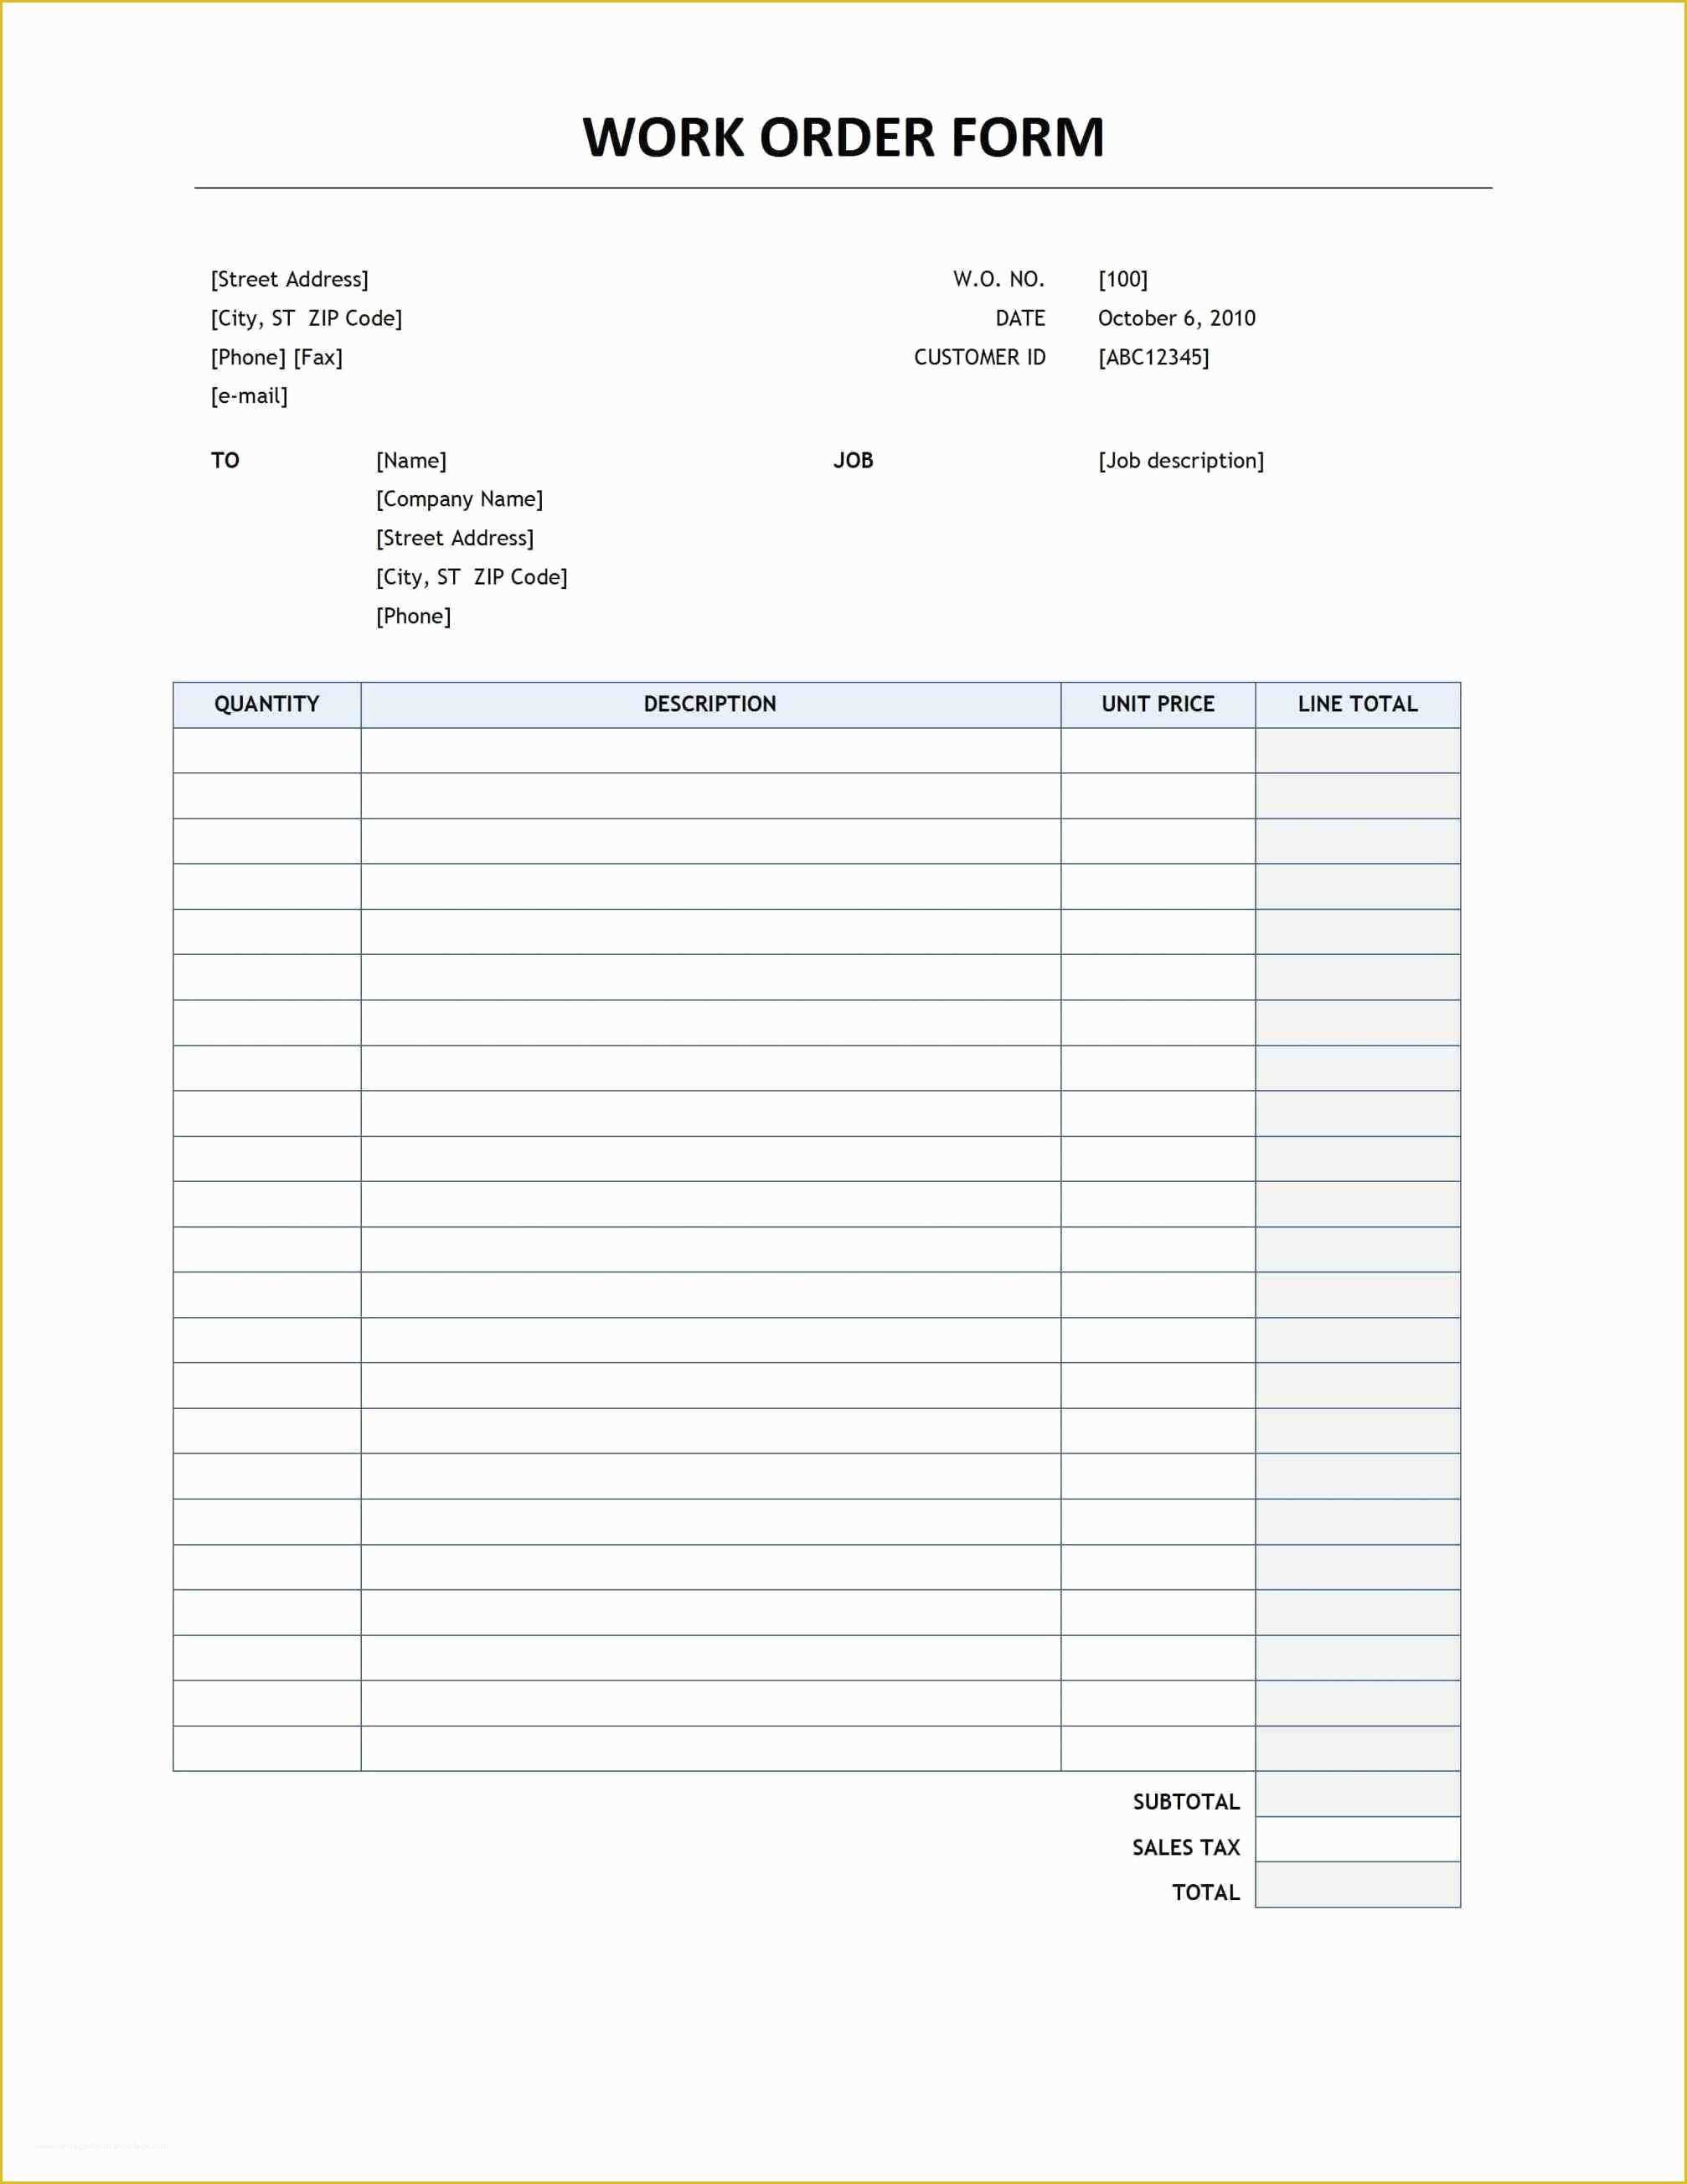 Free Work order Template Word Of This Initiates the Responsibility Of Providing Details